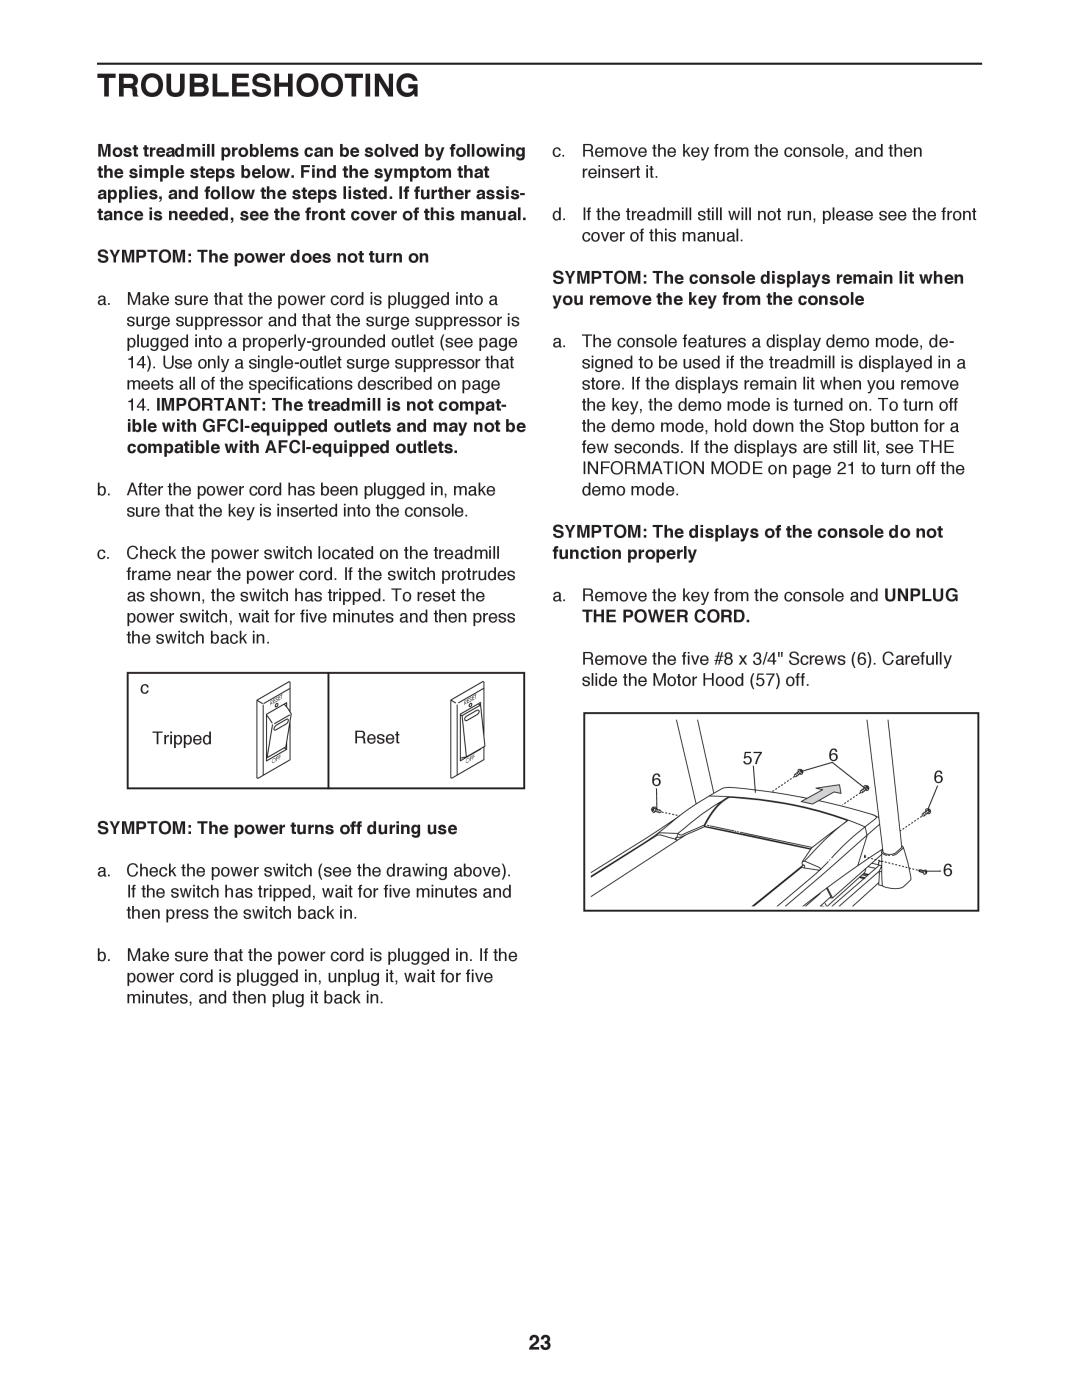 Sears NTL61011.1 user manual Troubleshooting, SYMPTOM The power does not turn on, SYMPTOM The power turns off during use 